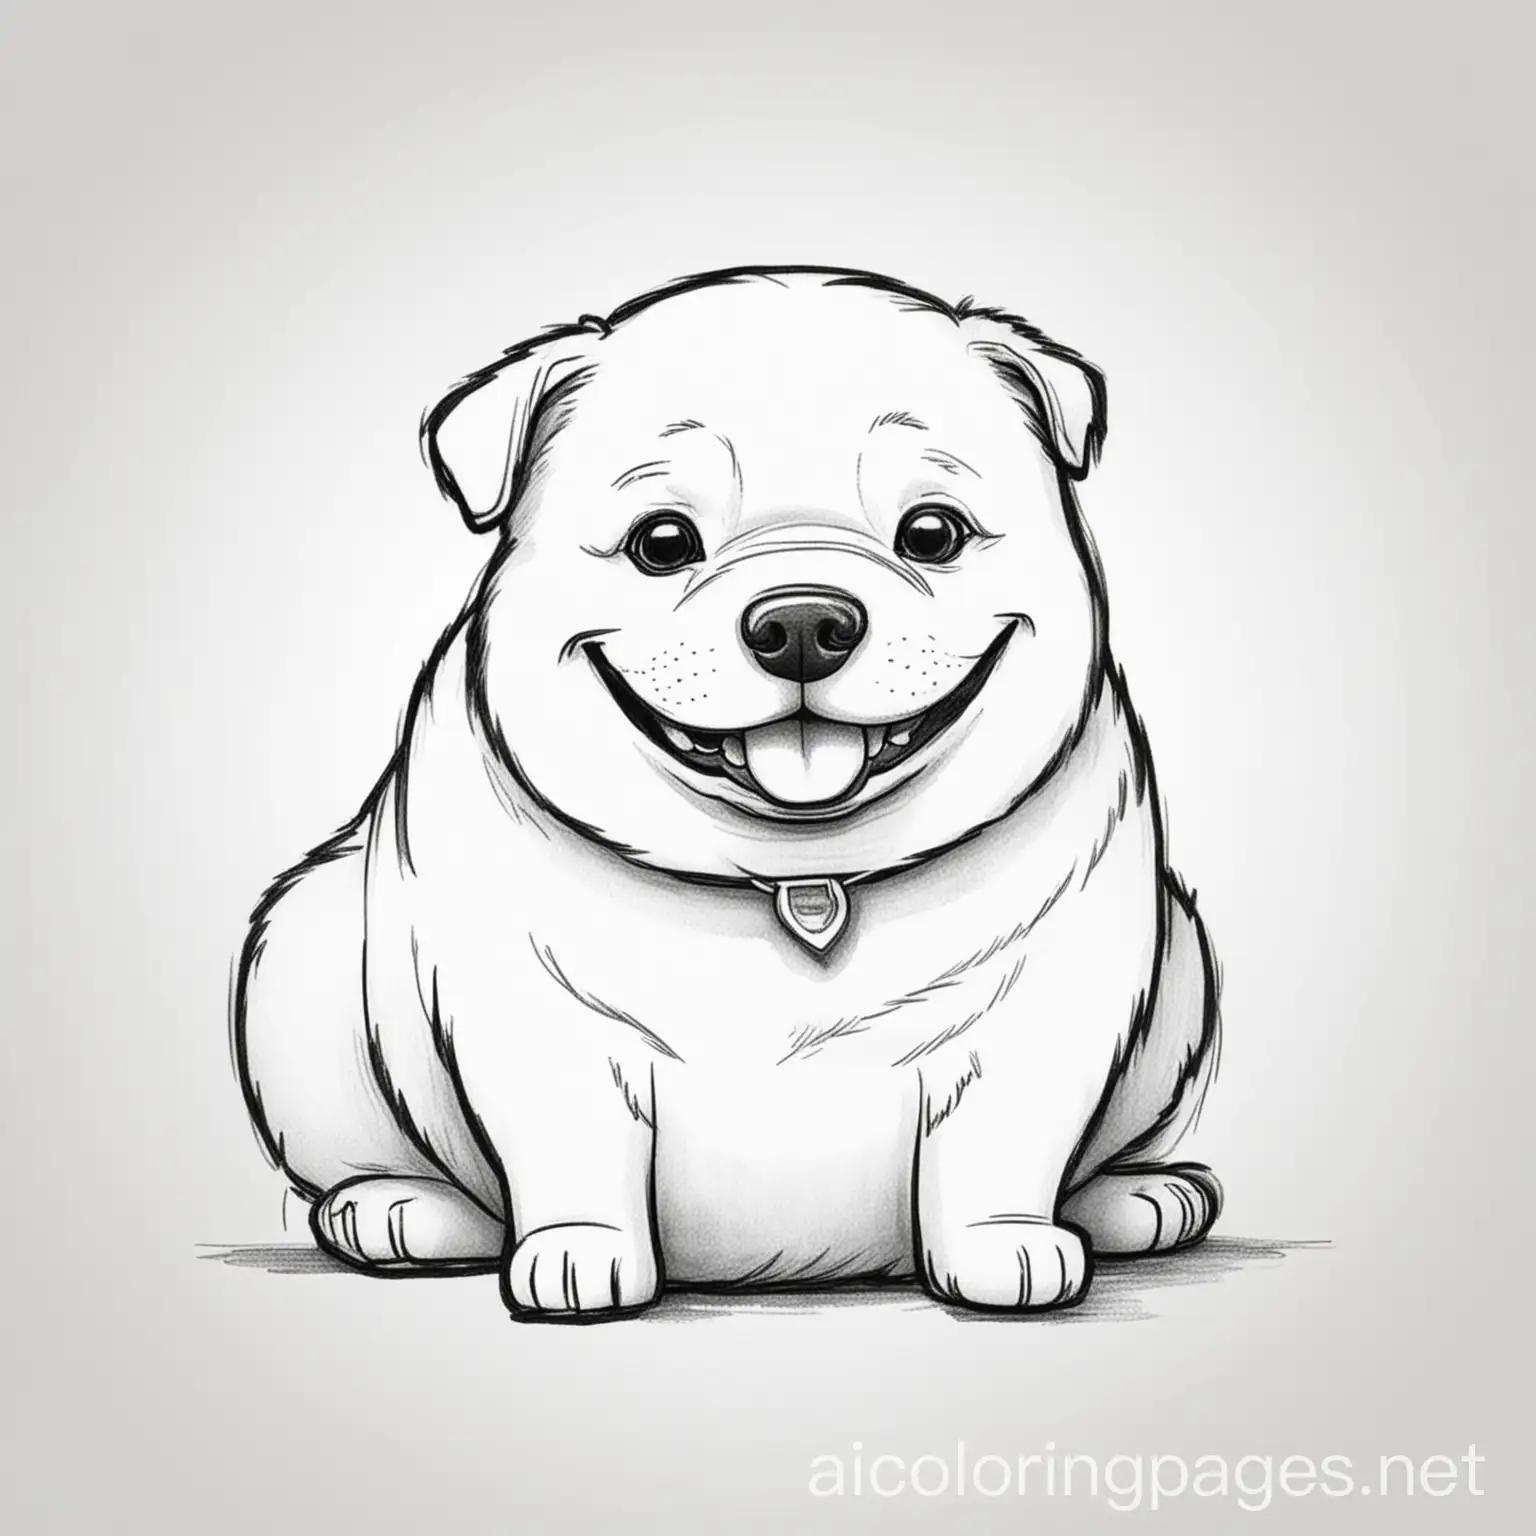 Cheerful-Fat-Dog-Coloring-Page-with-Simple-Line-Art-on-White-Background